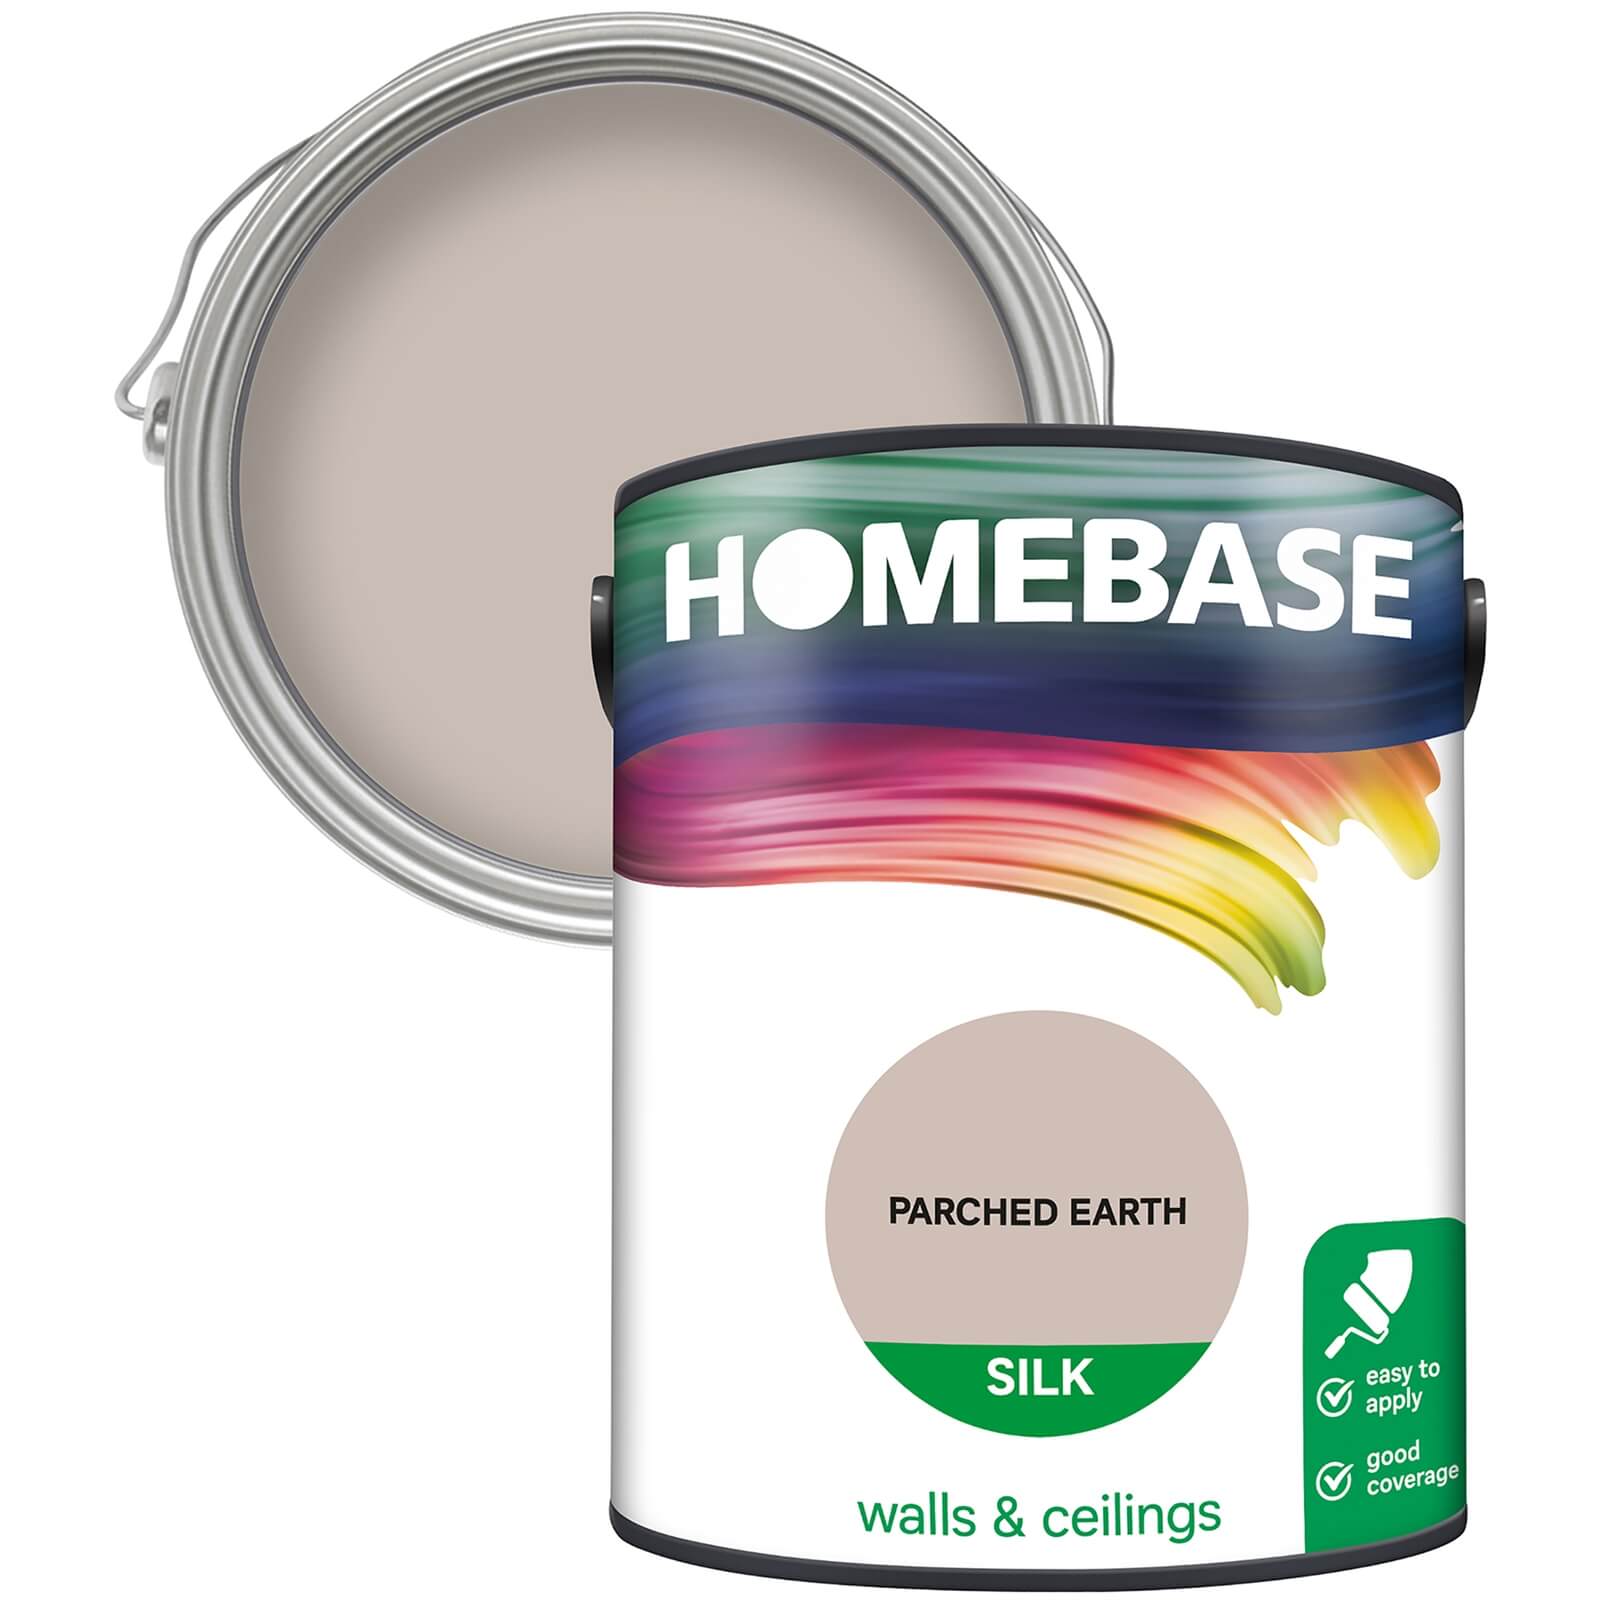 Homebase Silk Emulsion Paint Parched Earth - 5L